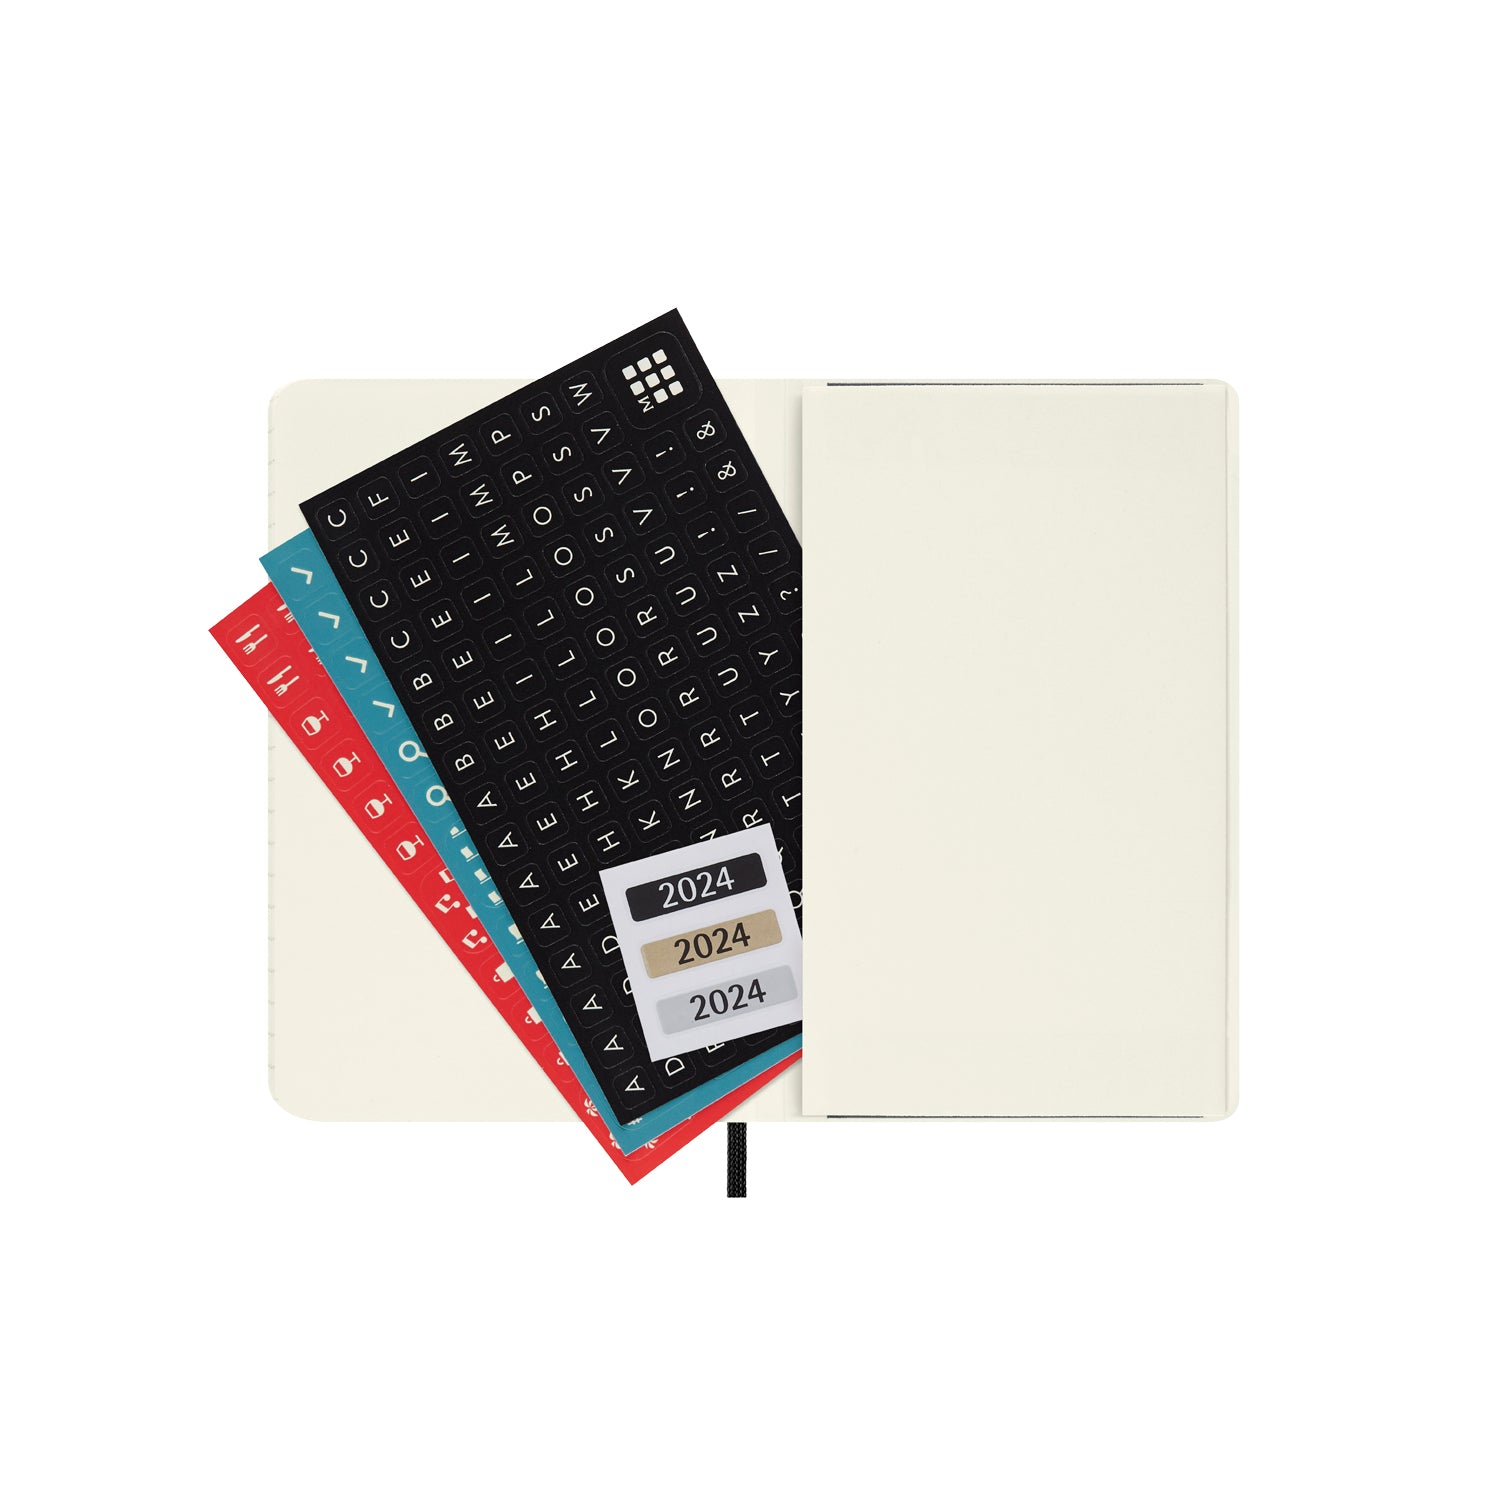 Moleskine 2024 Soft Cover Diary Weekly Notebook Pocket Black - Pencraft the boutique